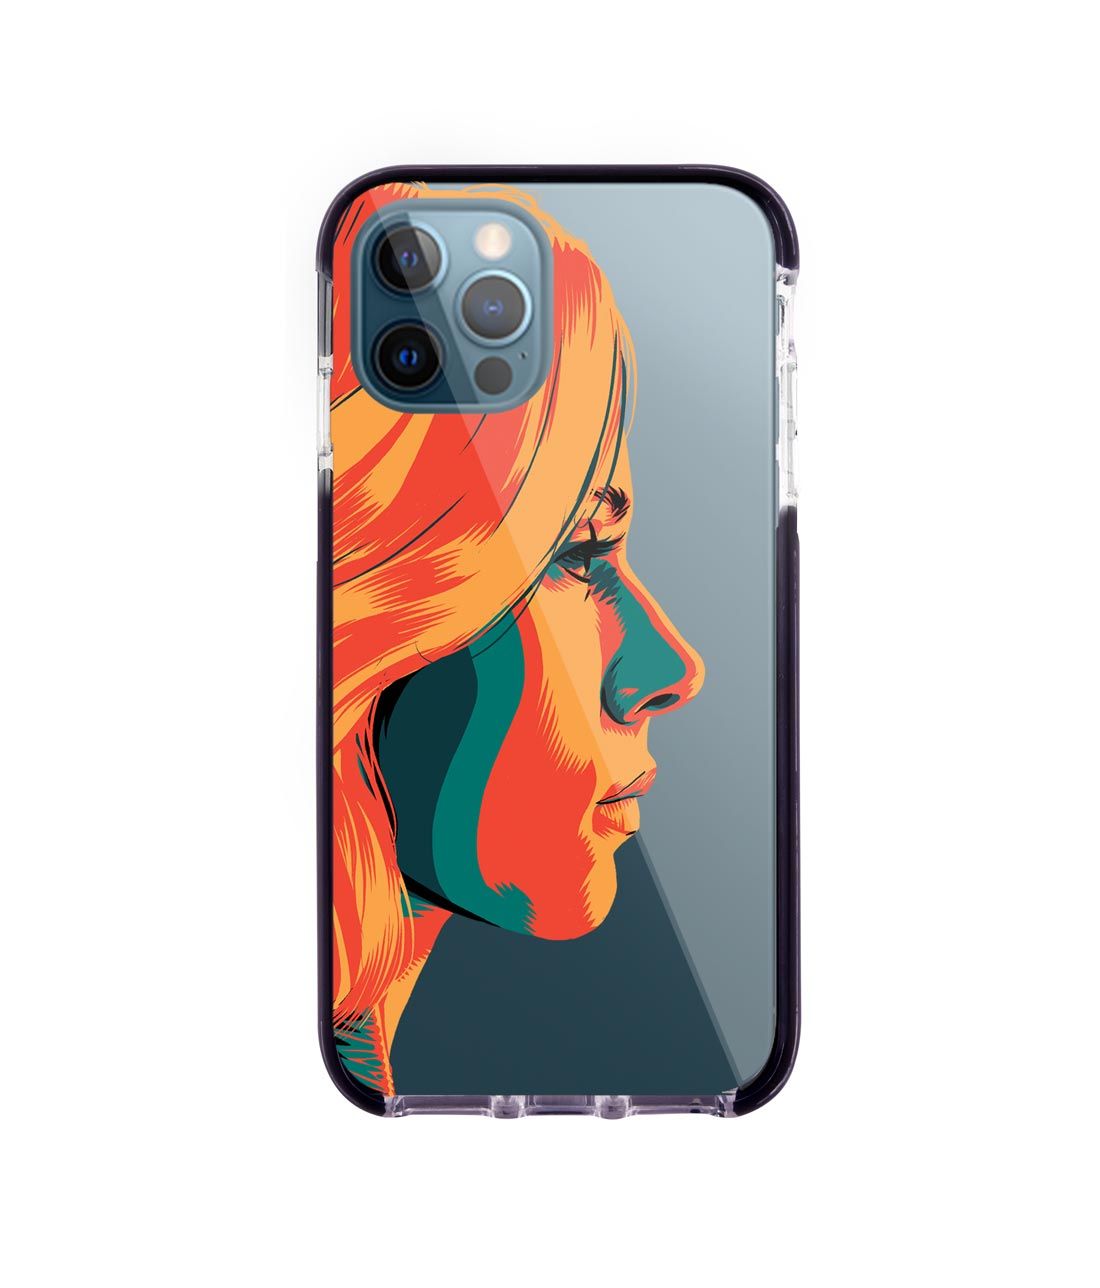 Illuminated Black Widow - Extreme Case for iPhone 12 Pro Max